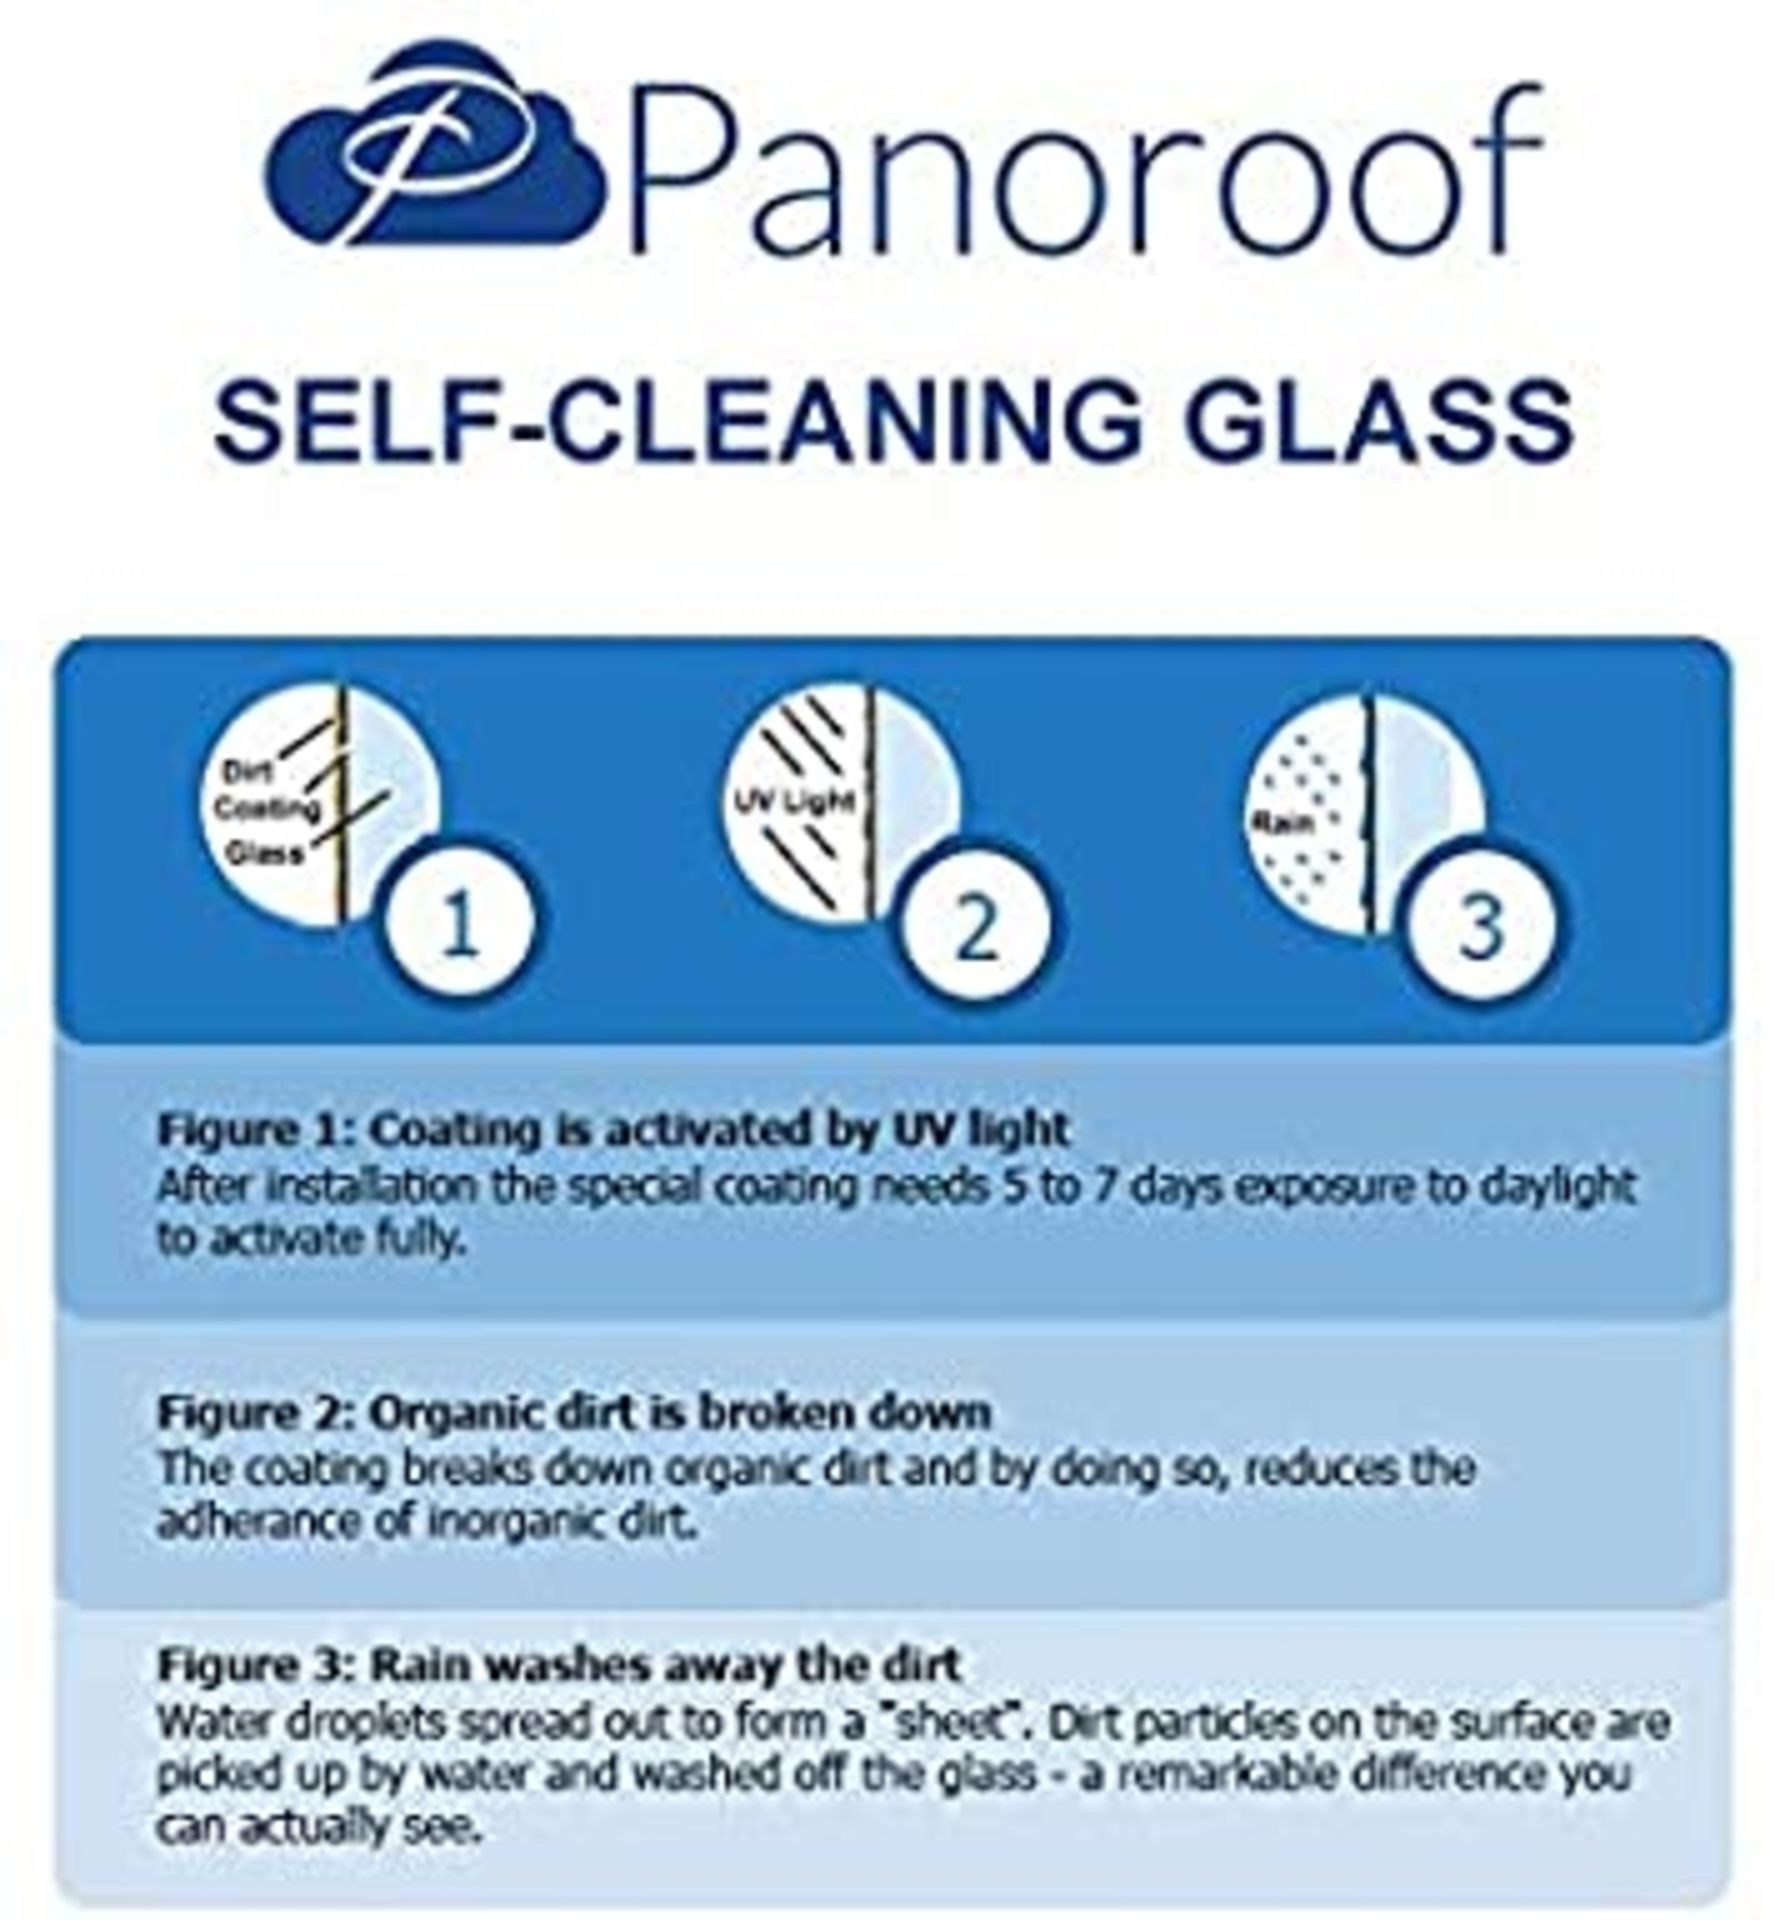 """Panoroof Triple Glazed Self Cleaning 900x900mm (inside Size Visable glass area) Seamless Glass - Image 6 of 6